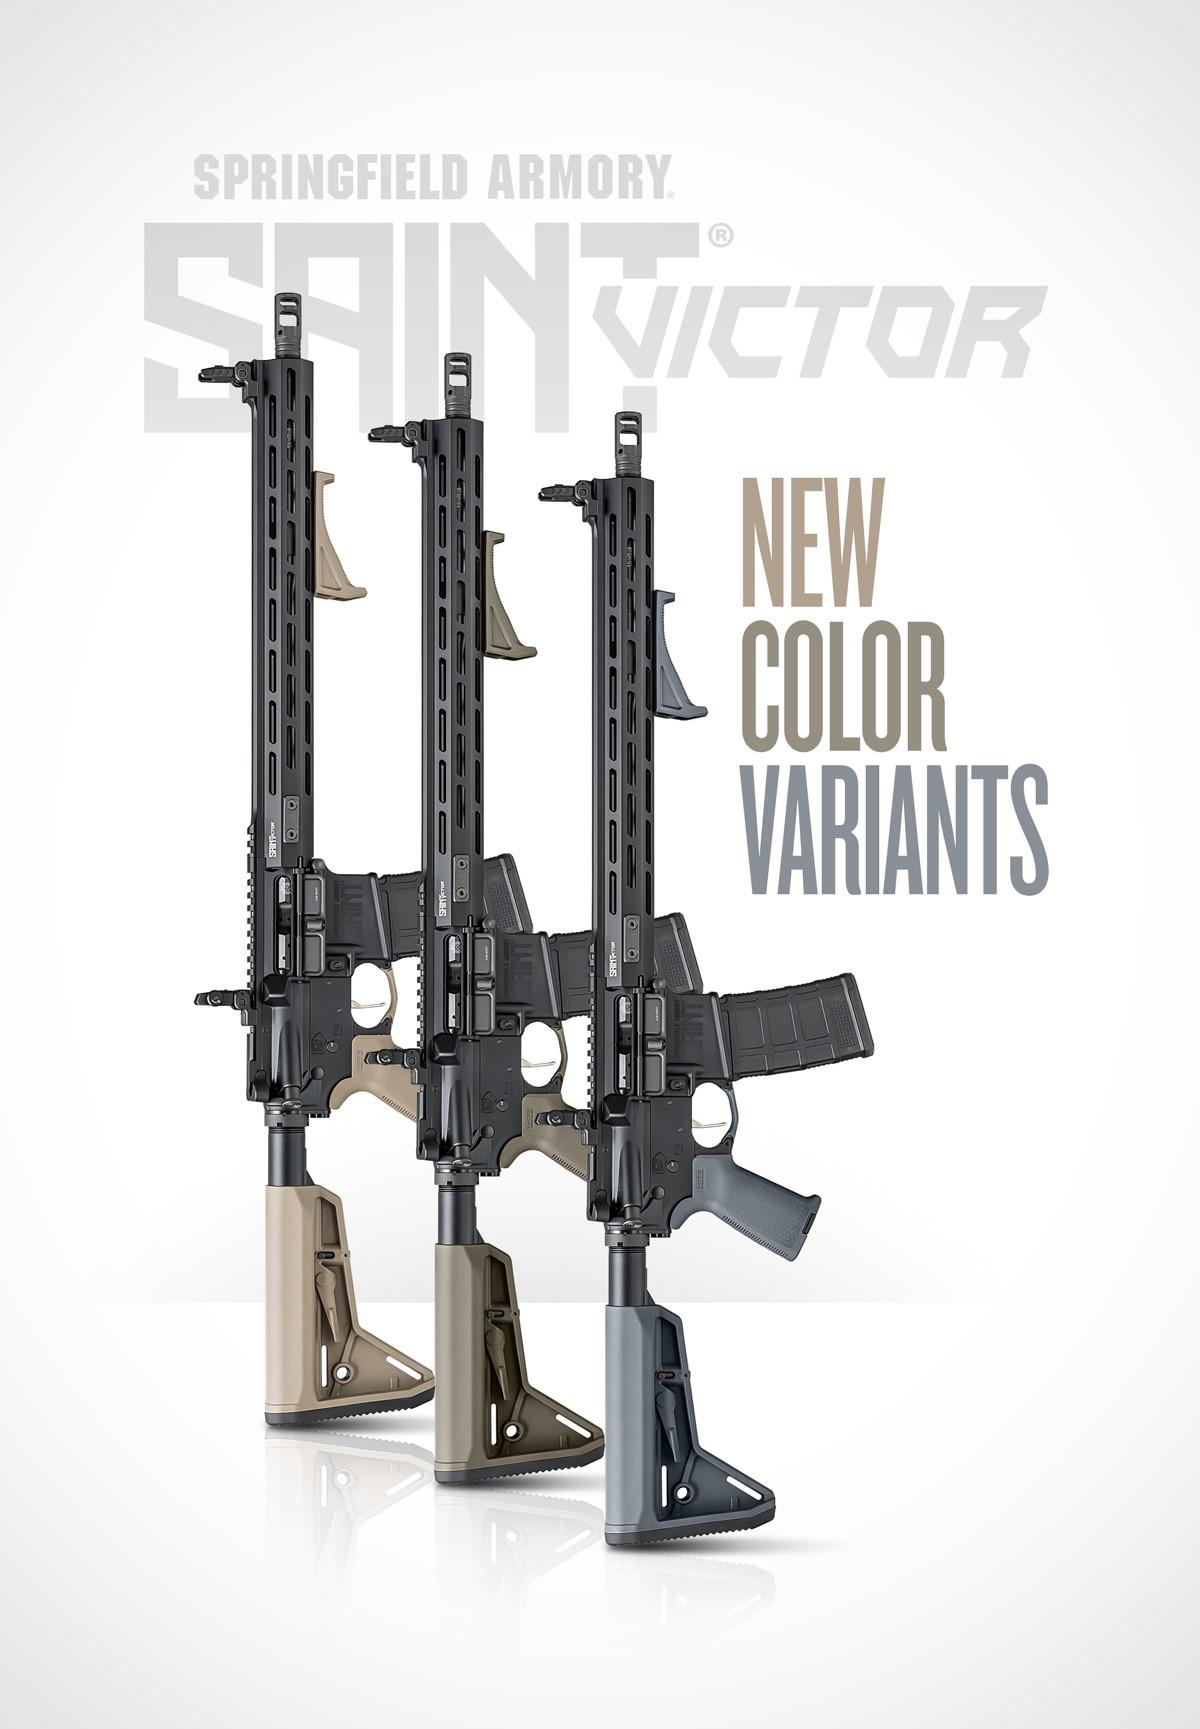 The only difference between the three is in their Magpul furniture which is (stop if you heard this already) in Gray, OD Green, and Desert FDE...